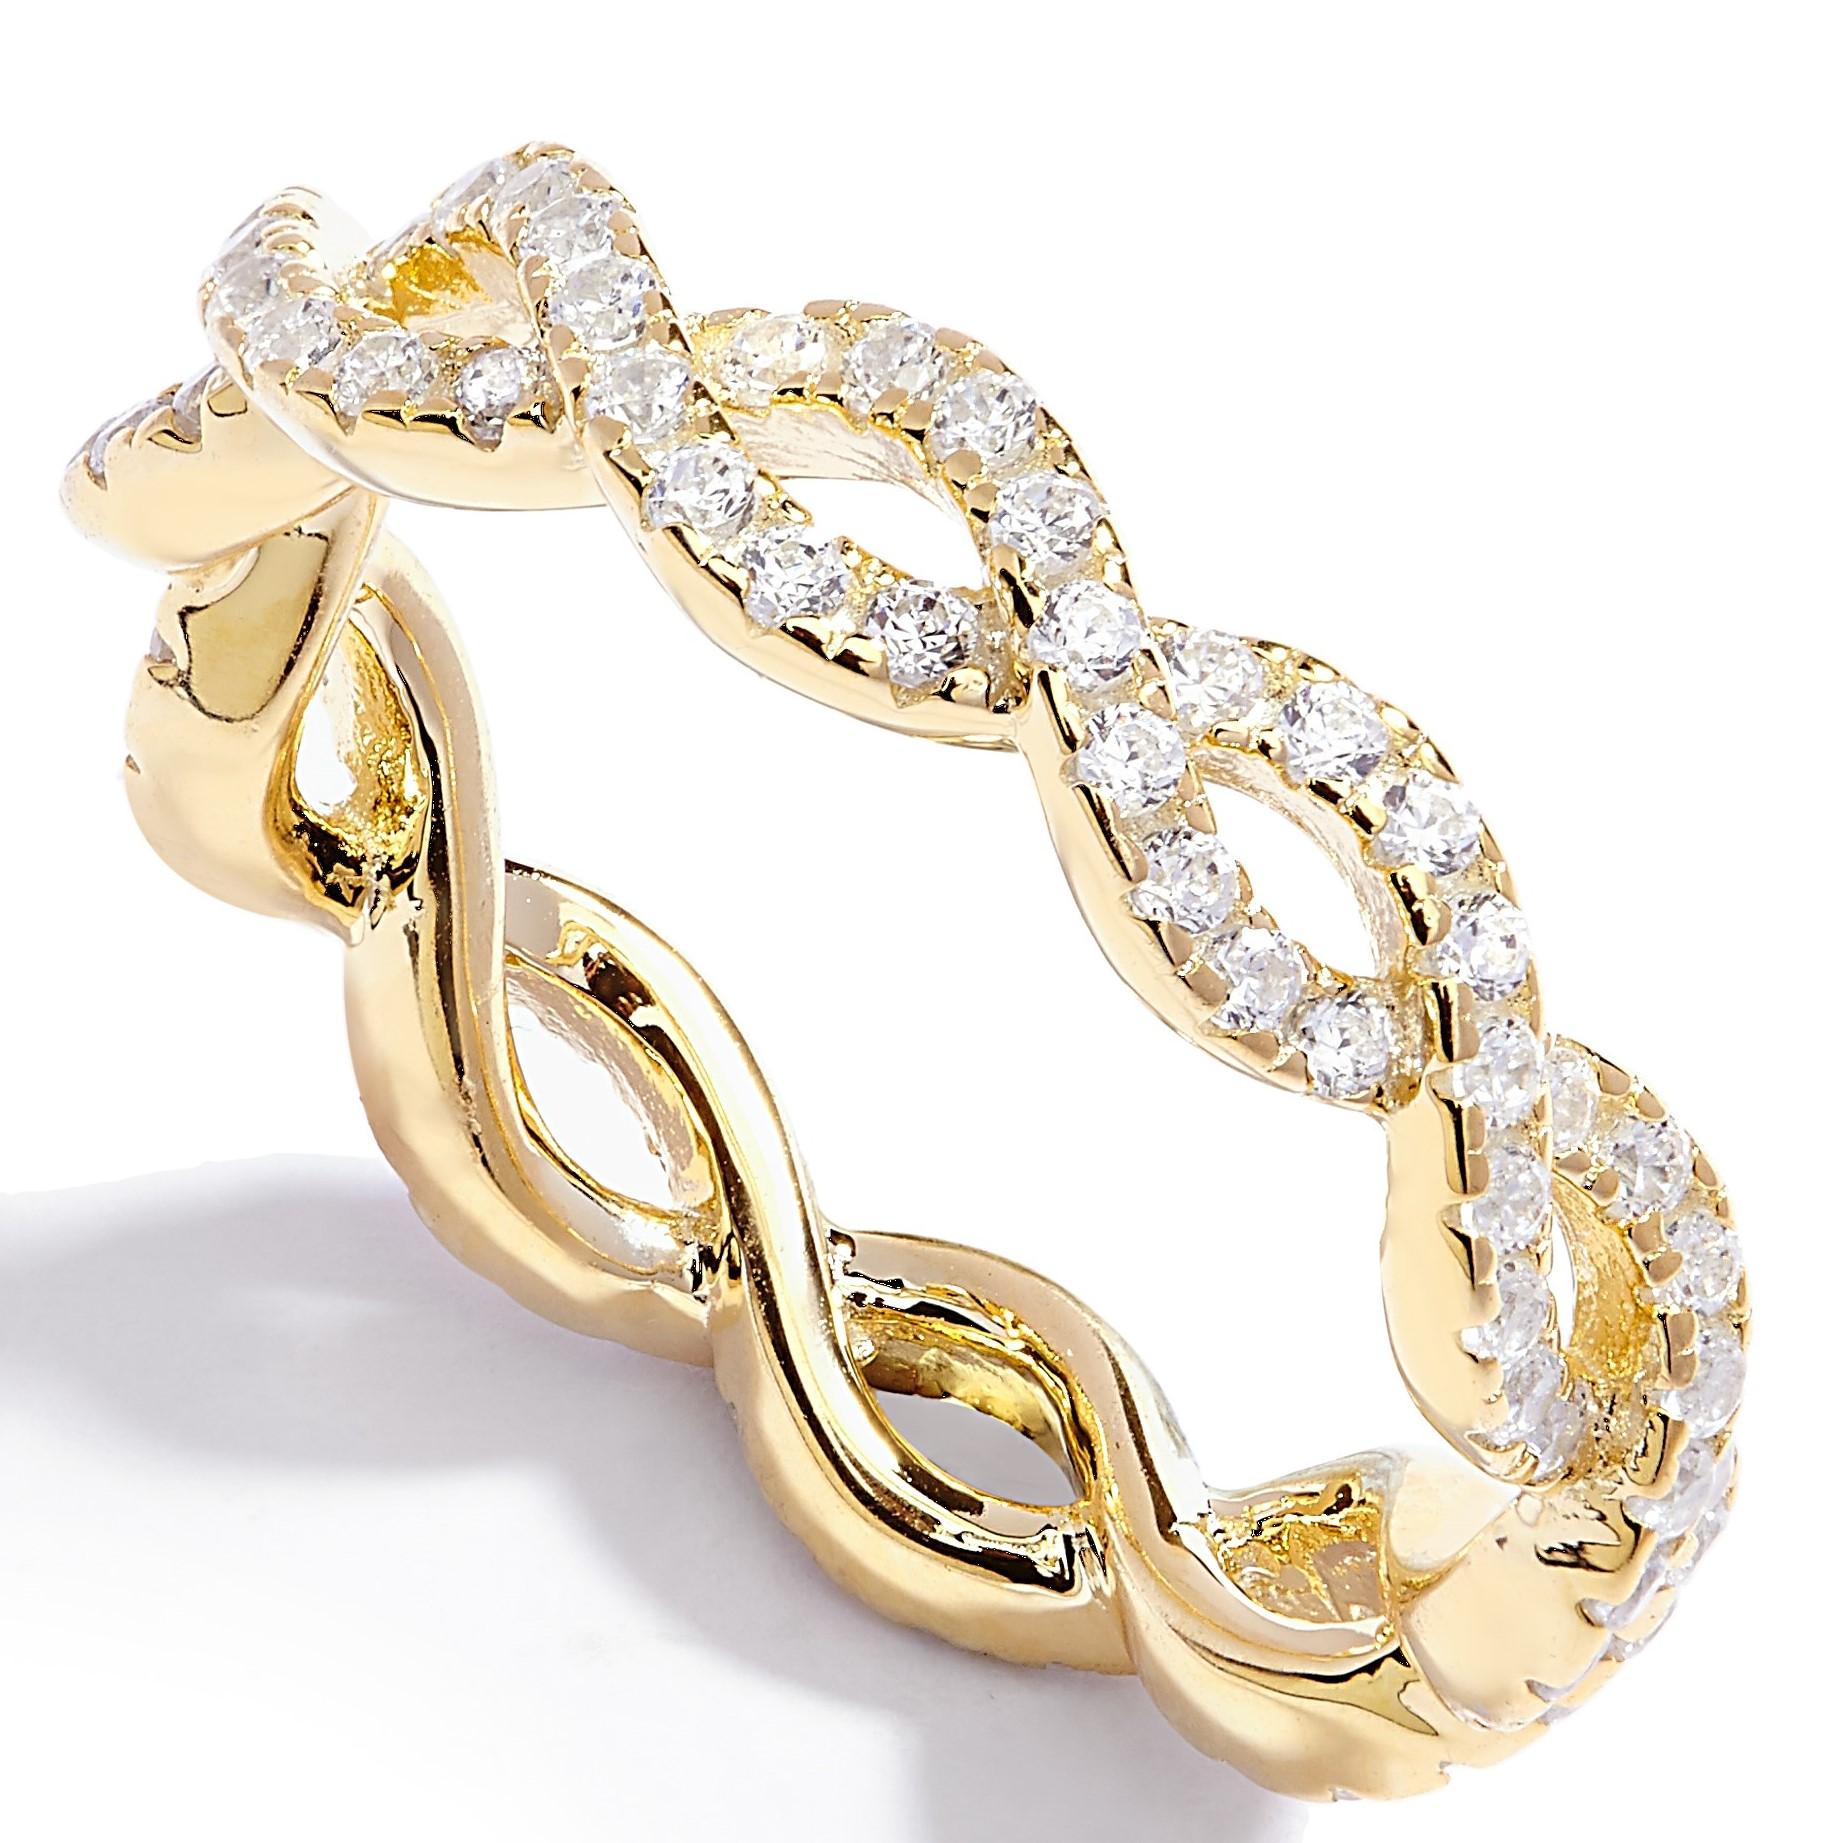 A classic look with a contemporary twist, this alluring full eternity twist ring effortlessly captures the most elegant of designs. 

Featuring 1.71ct of round brilliant cuts encapsulated in 925 sterling silver with a 14kt yellow finish.

Whether